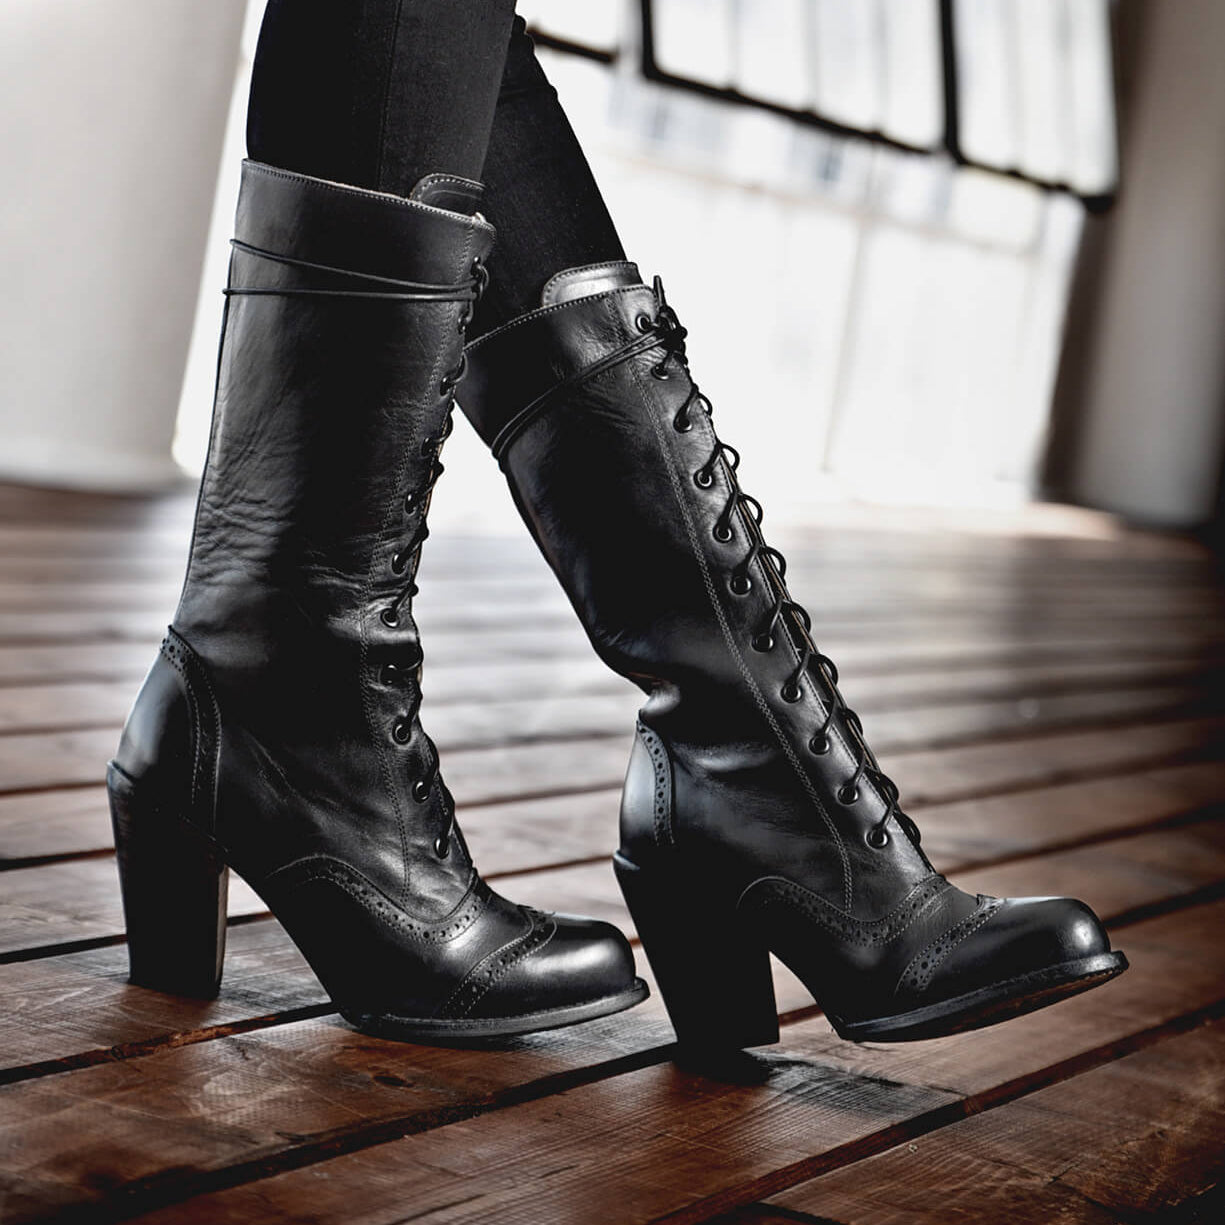 A woman wearing the Ariana black leather boots with hand-tooled pinking detail on a wooden floor.